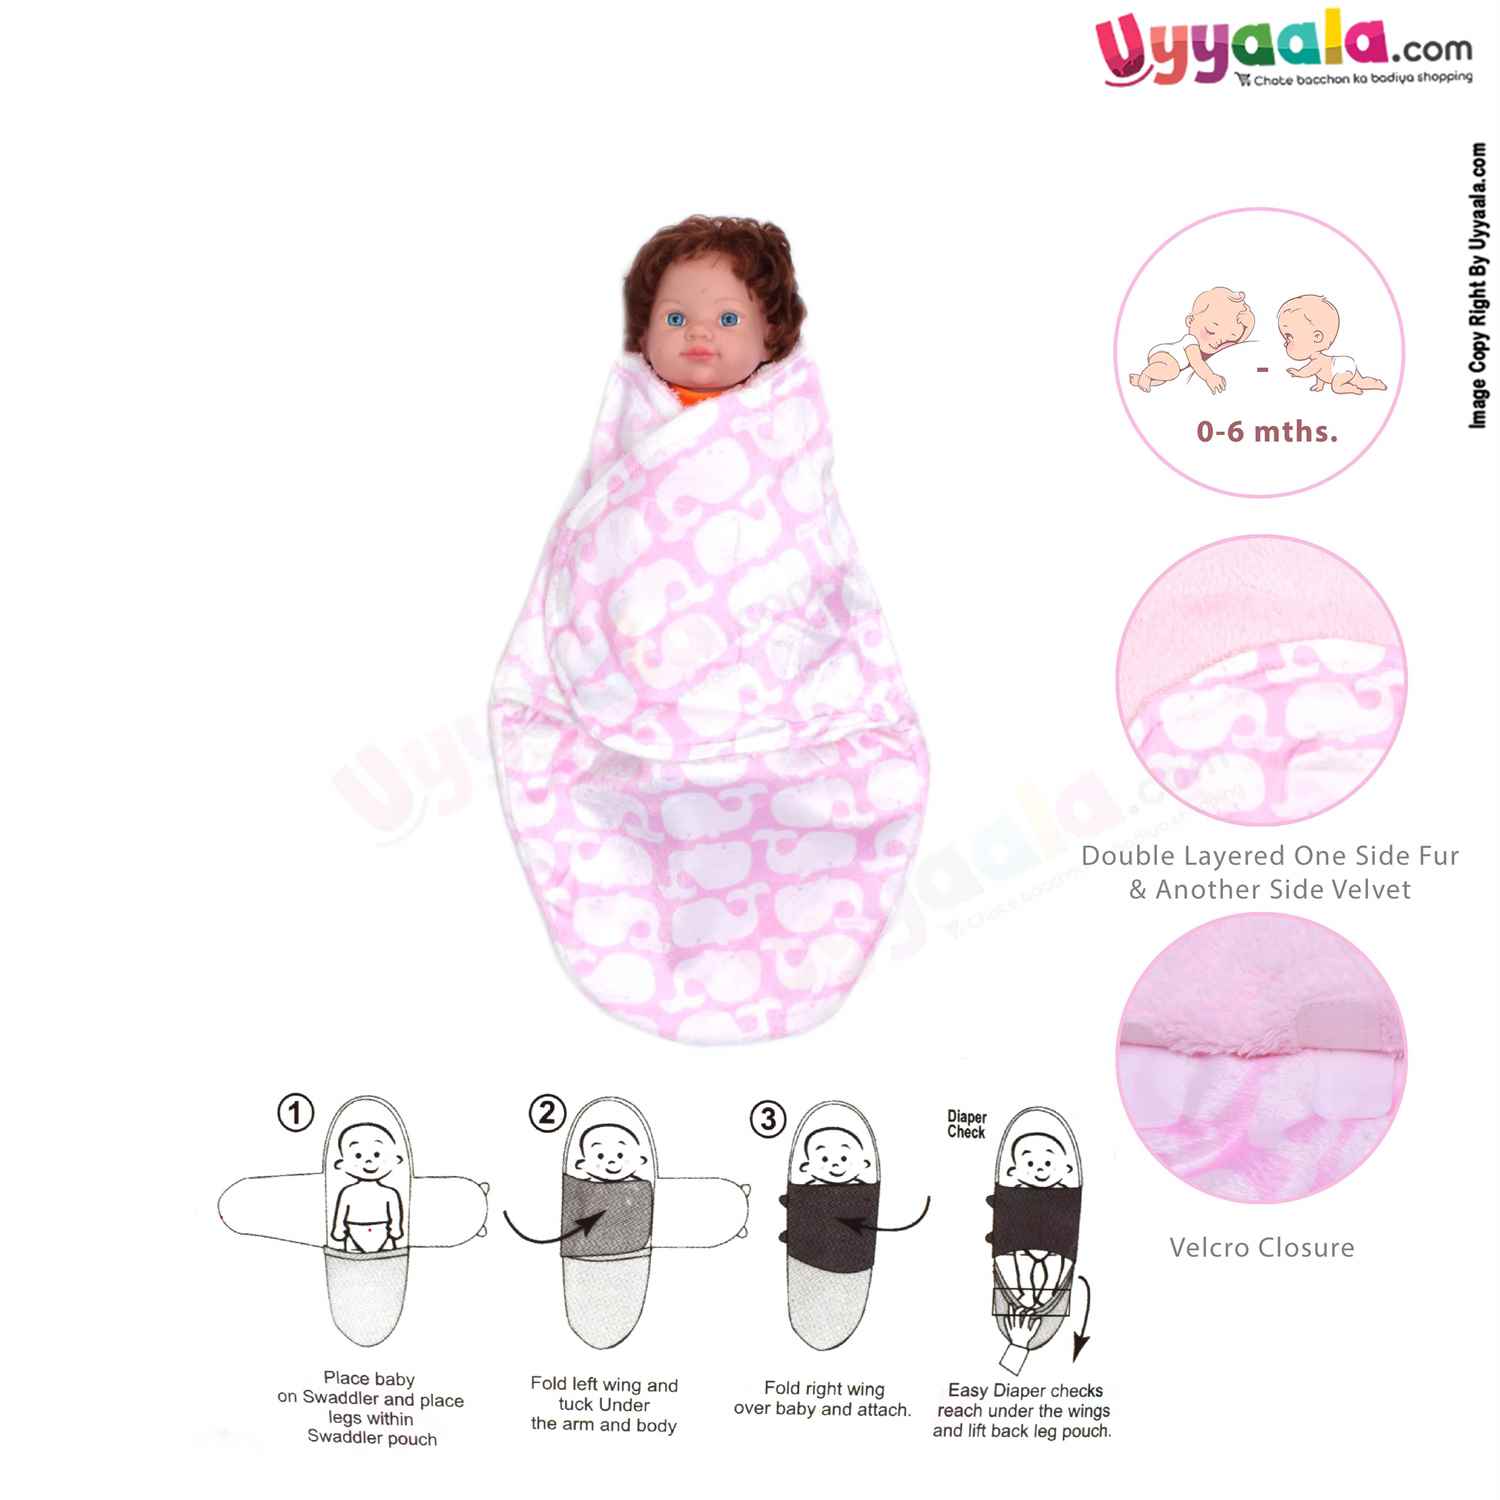 Double Layered Swaddle Wrapper One Side Fur & Another Side Velvet with Whales Print for Babies 0+m Age, Size(70*51cm) Light Pink